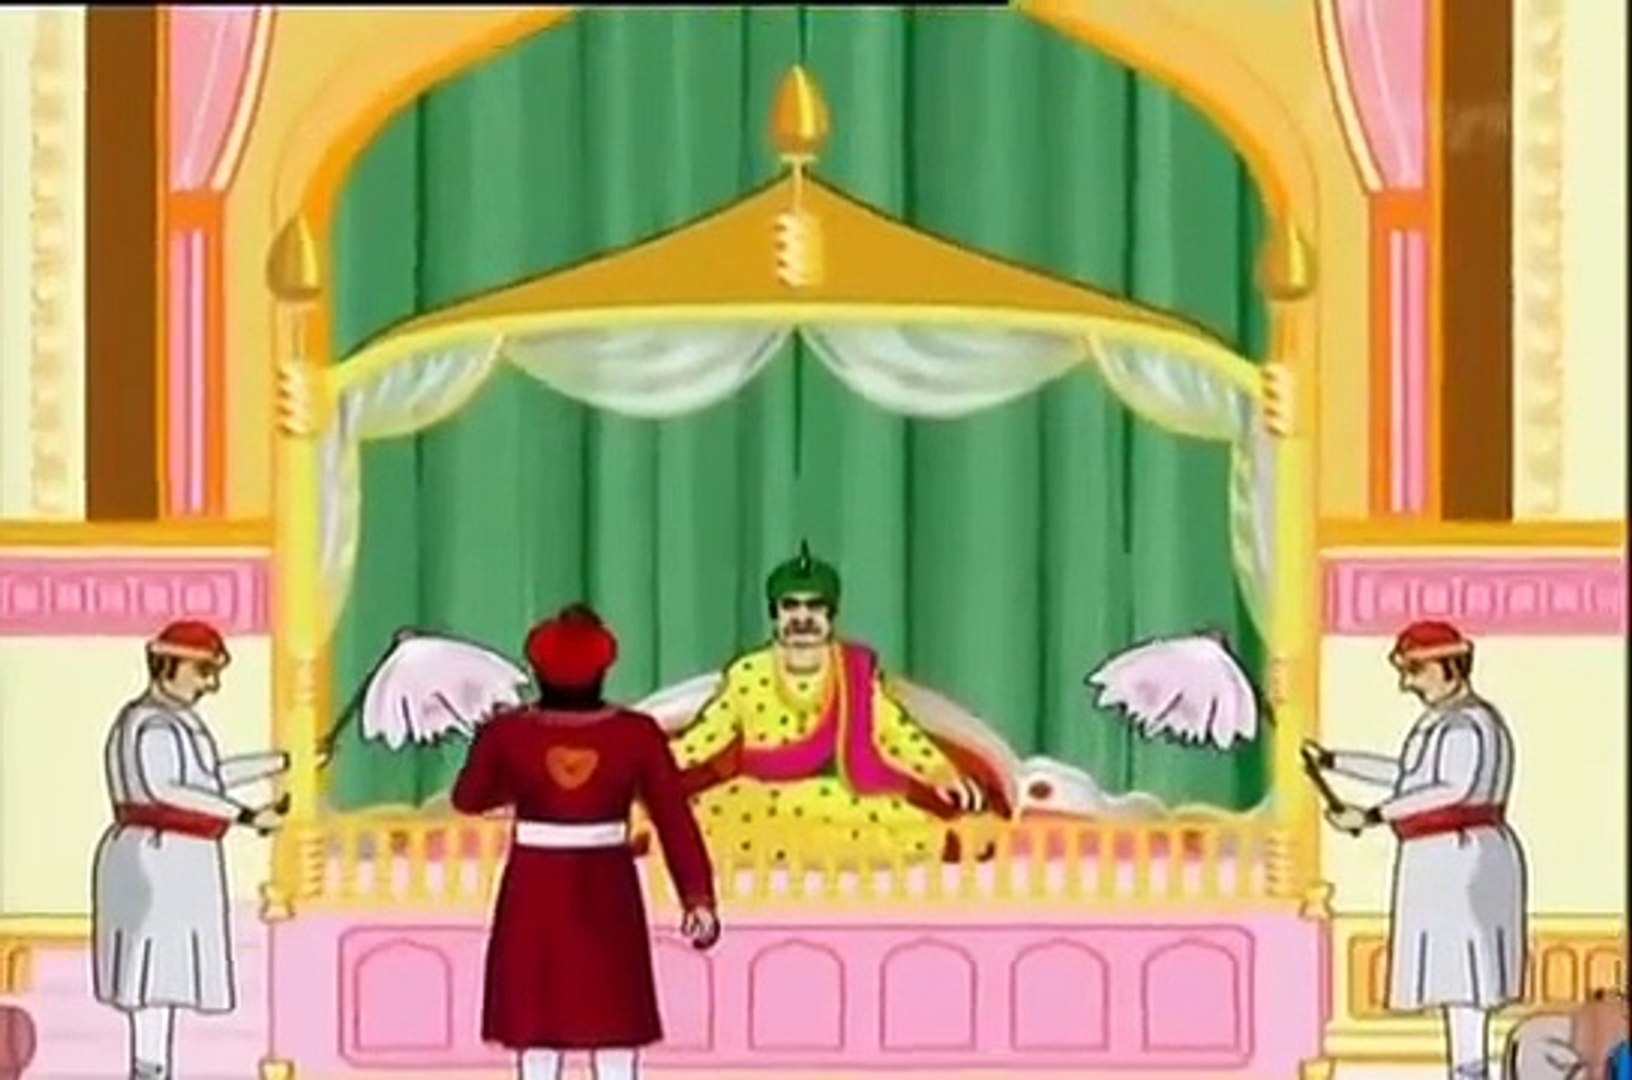 Akbar And Birbal Full Stories In Tamil (HD) - Compilation of Cartoon/ Animated Stories For - Dailymotion Video